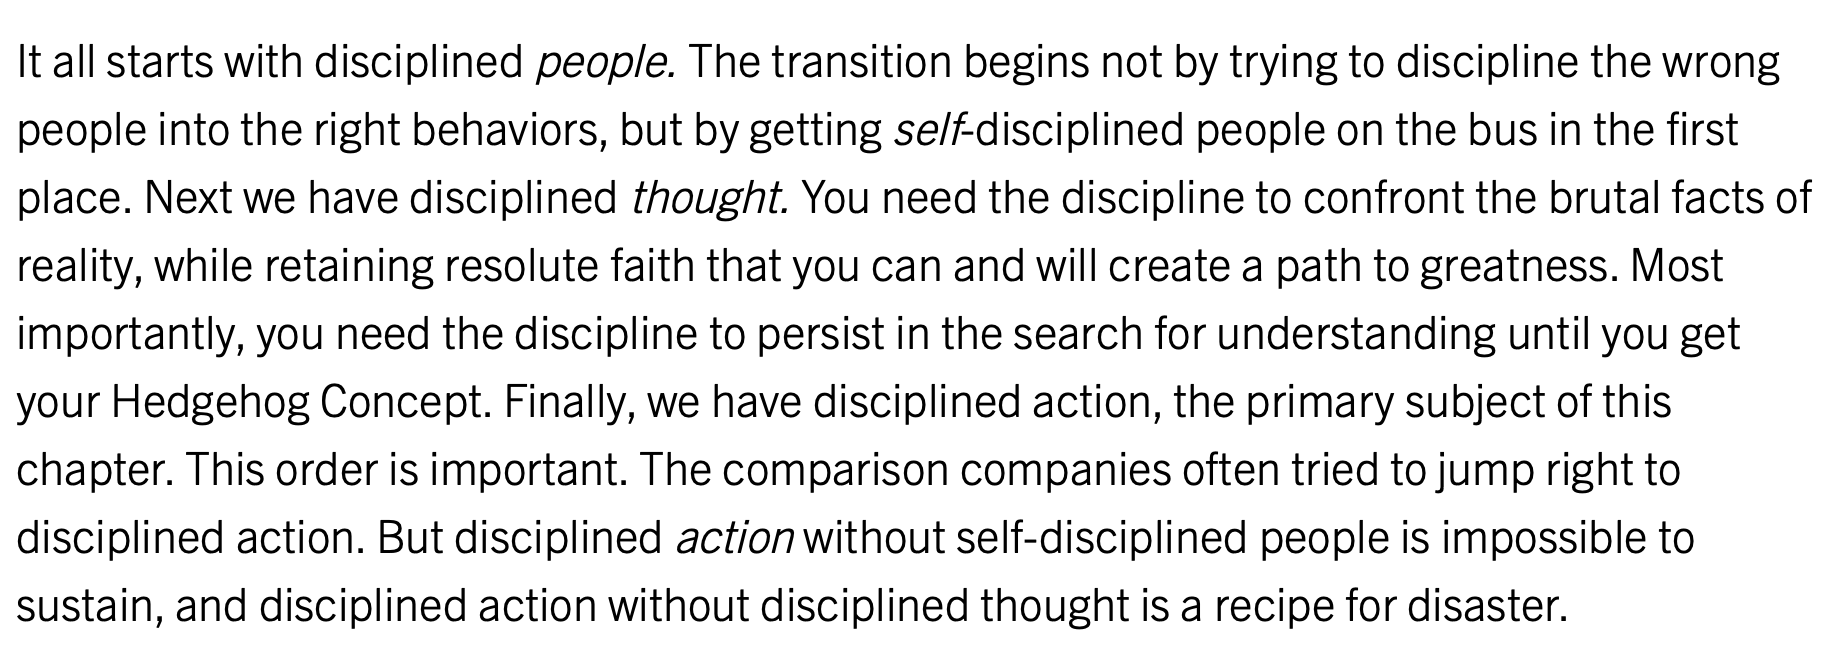 A Culture of Discipline - Jim Collins - People - Thought - Action